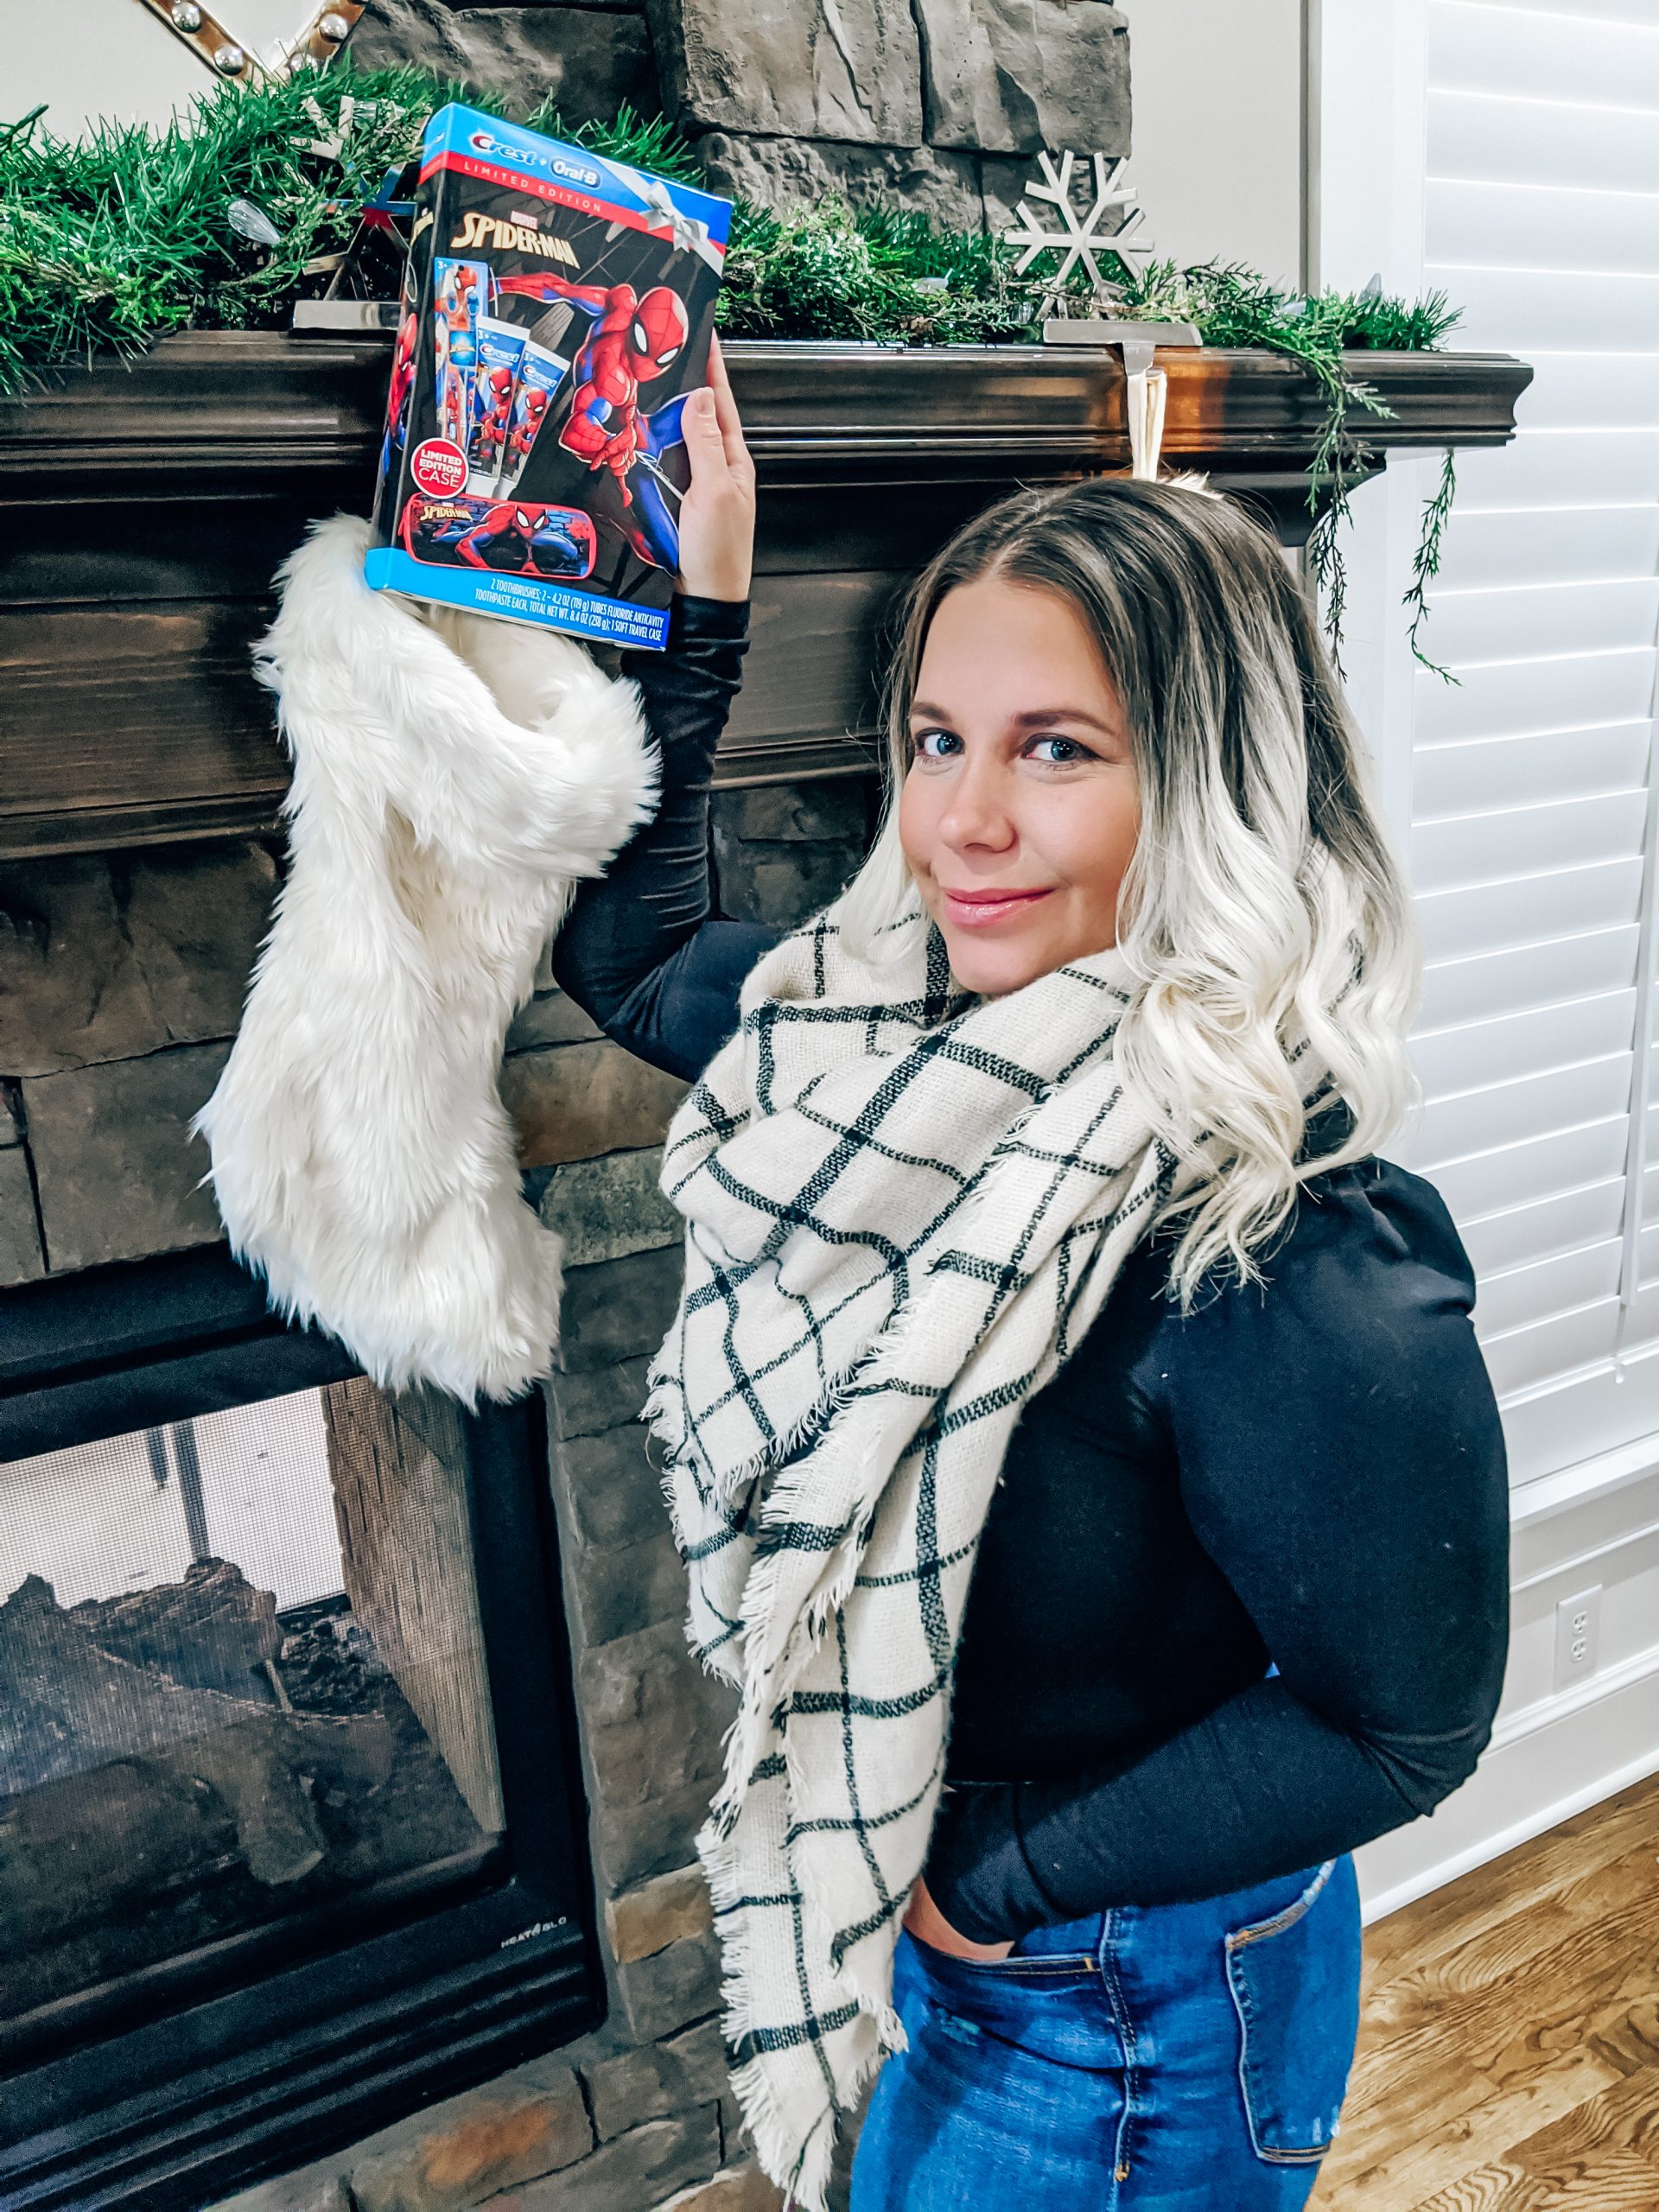 Easy Gifts for Everyone on Your List! These holiday gift packs are a great gift idea for anyone on your list. Choose a different one for each member of your family! #giftideas #giftsforher #giftsforhim 